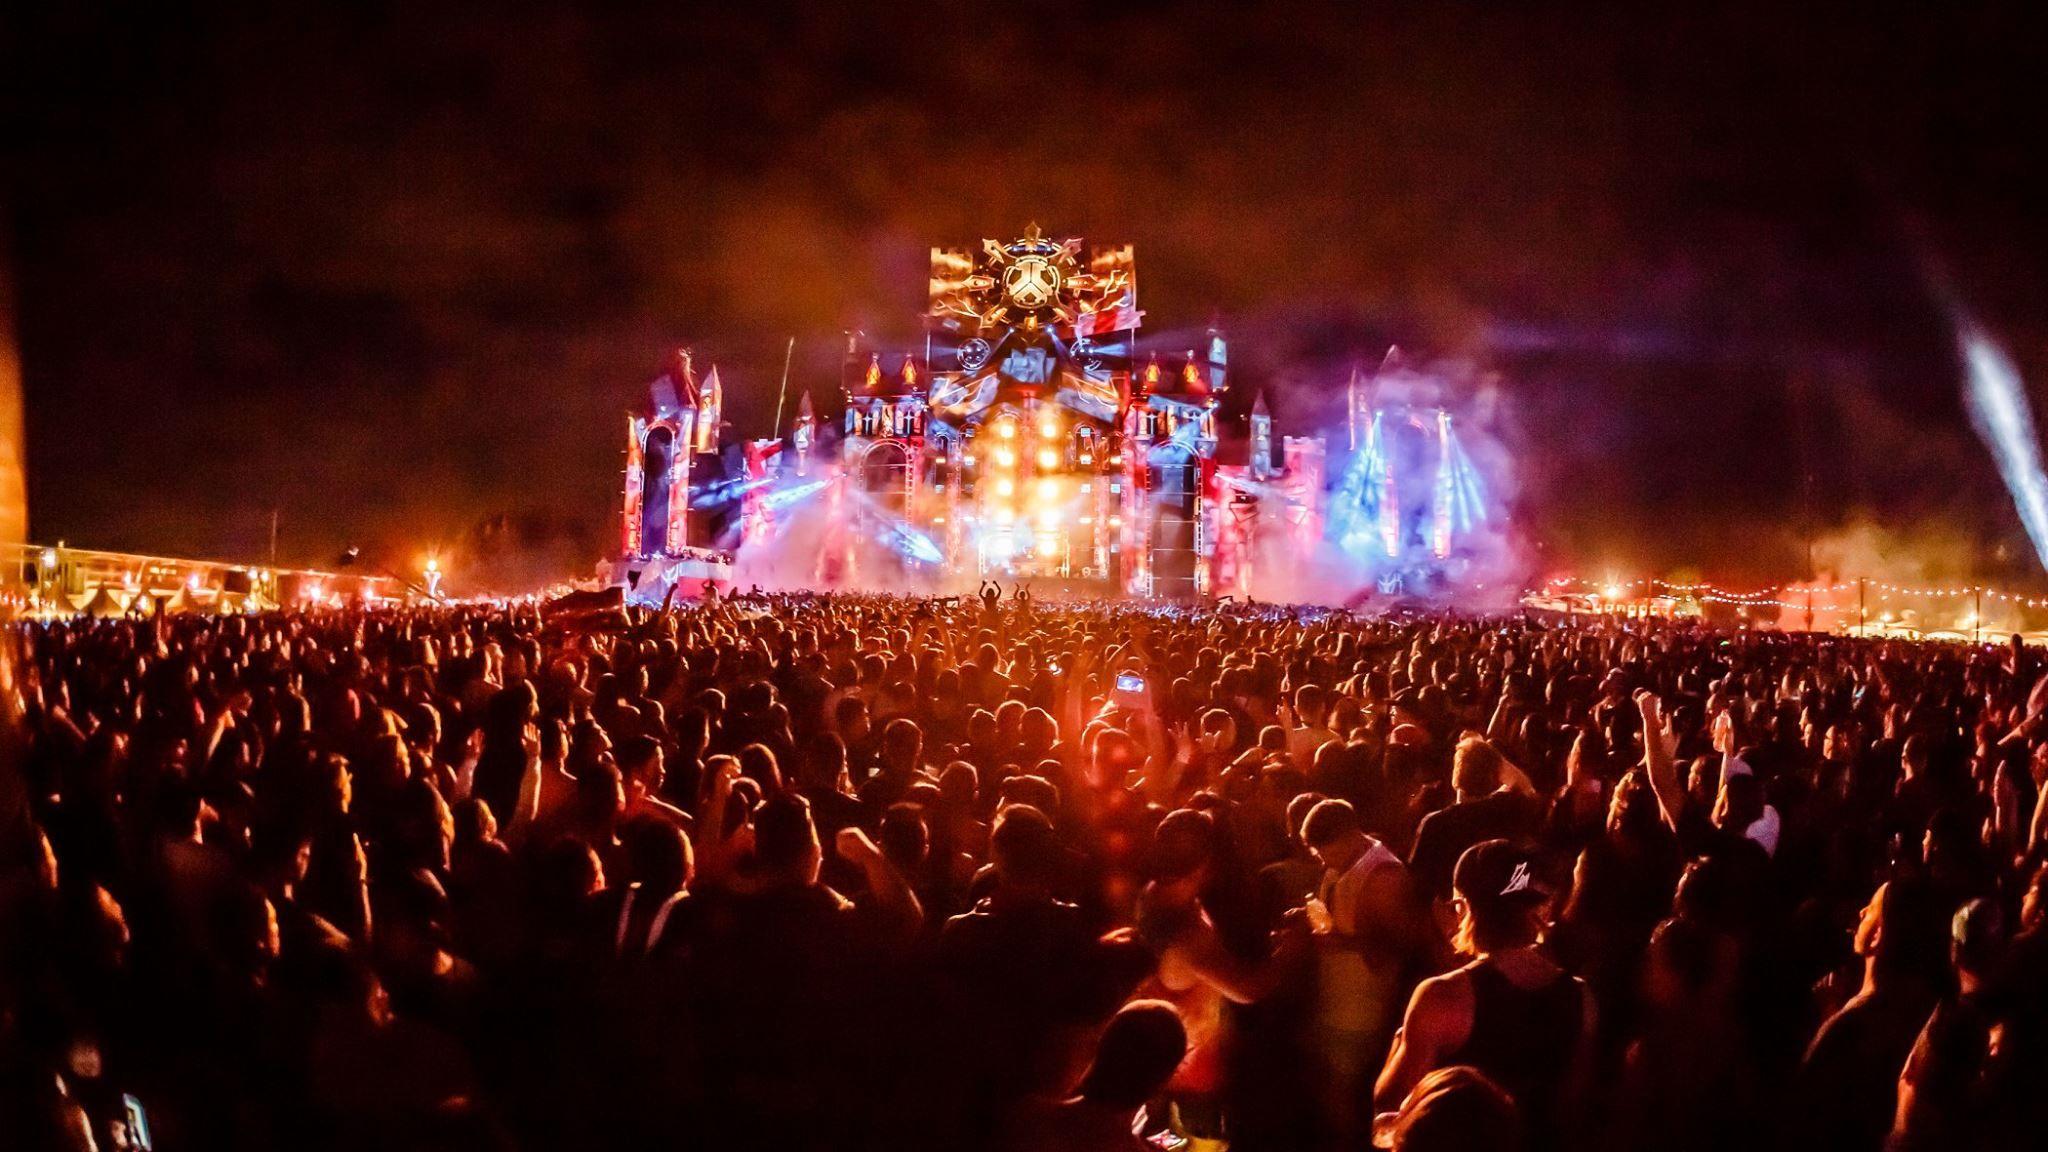 26 Year Old Dies At Sydney Defqon.1 Music Festival, 8 Others